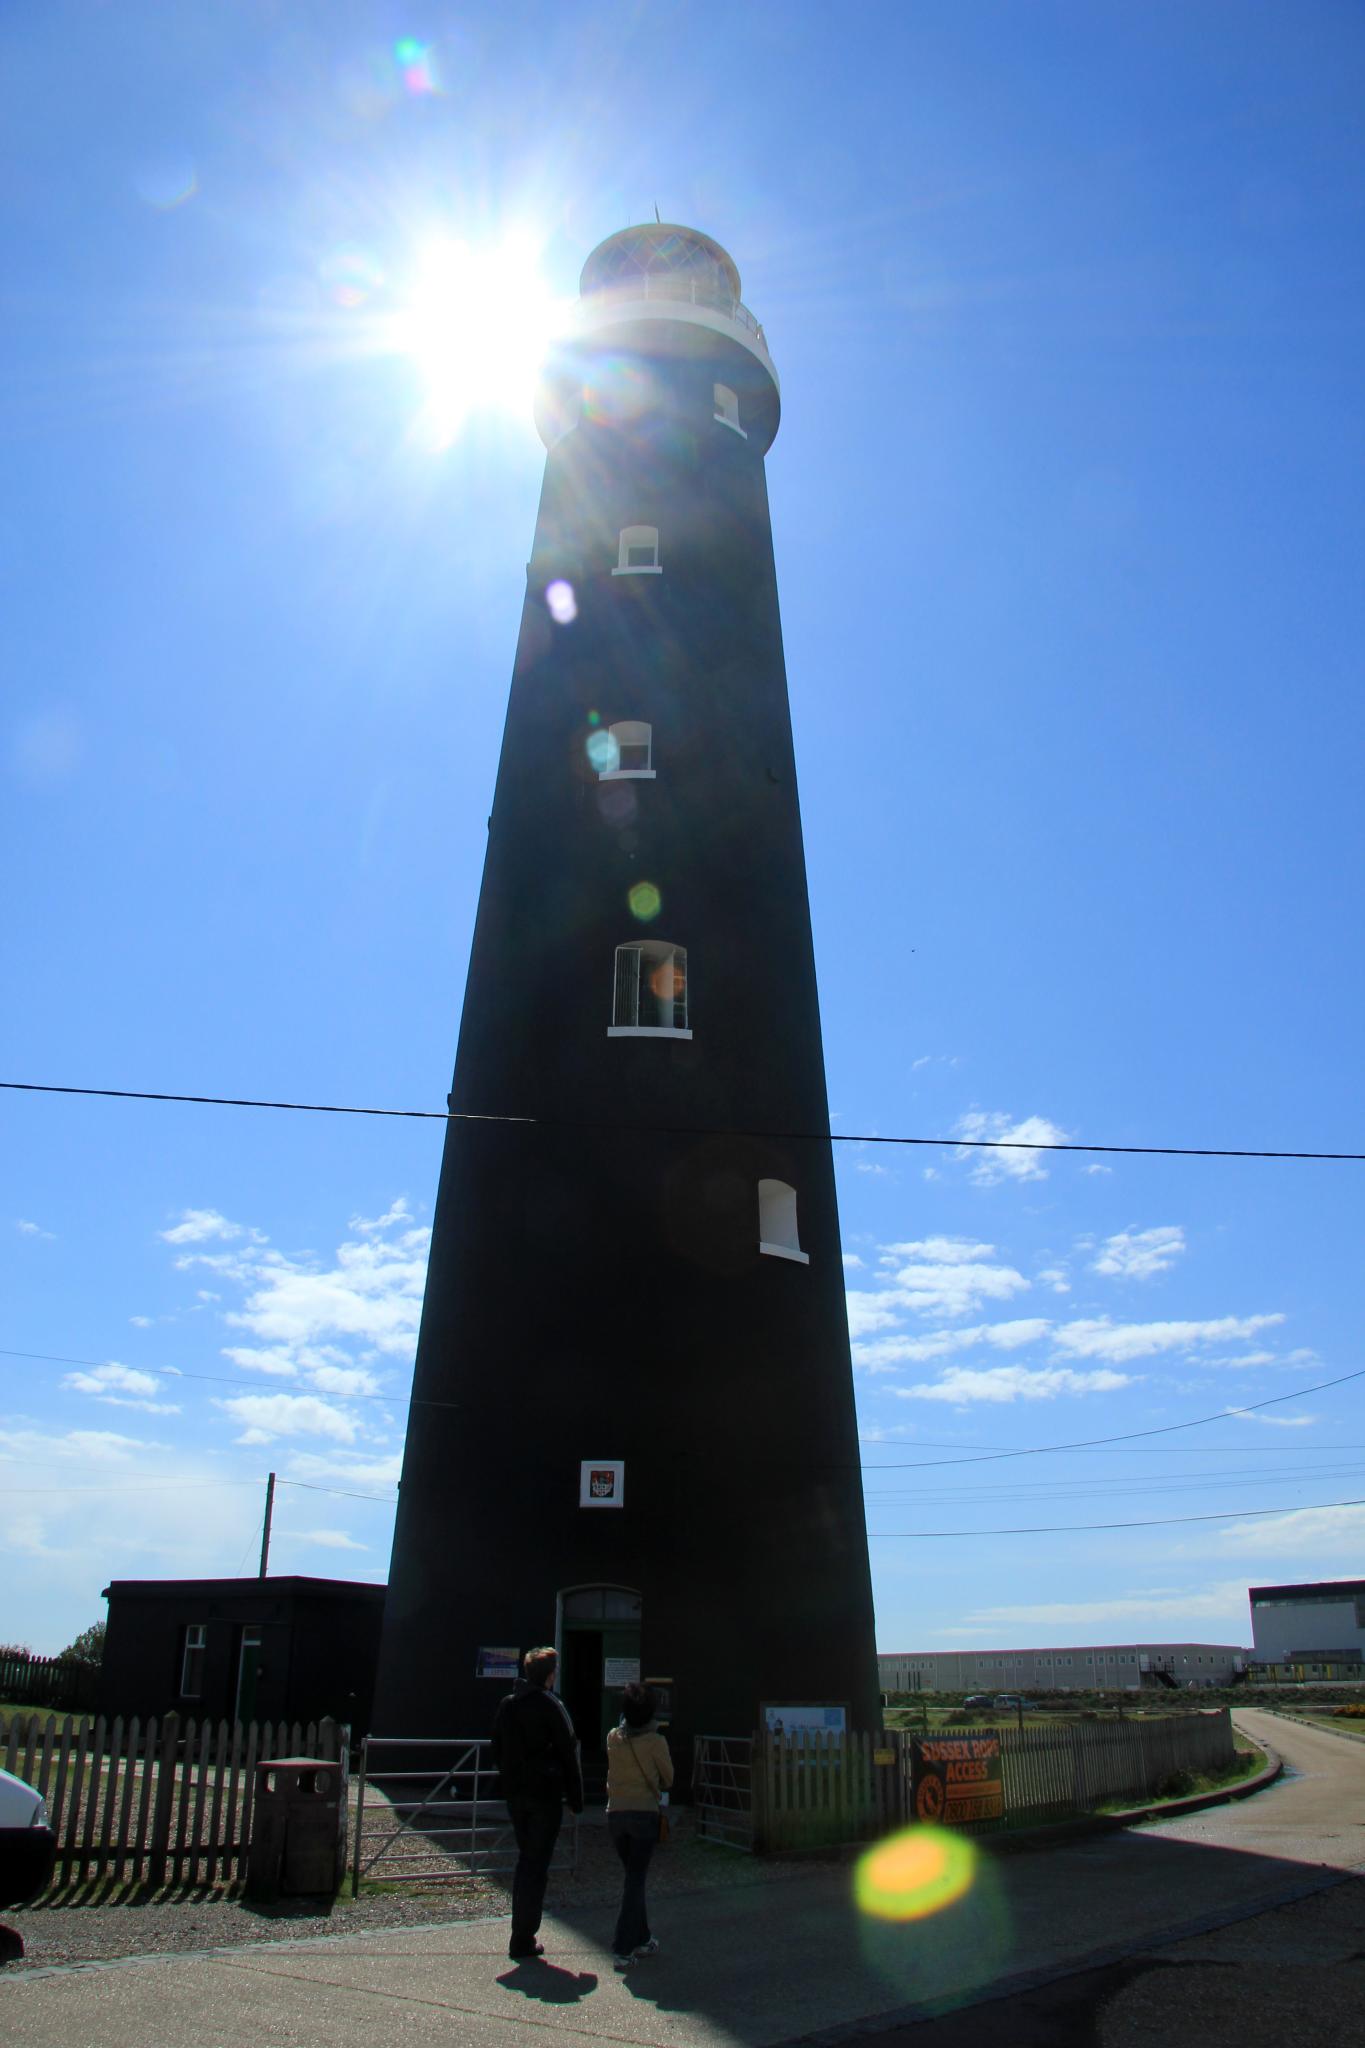 the lighthouse is situated on the sunny day